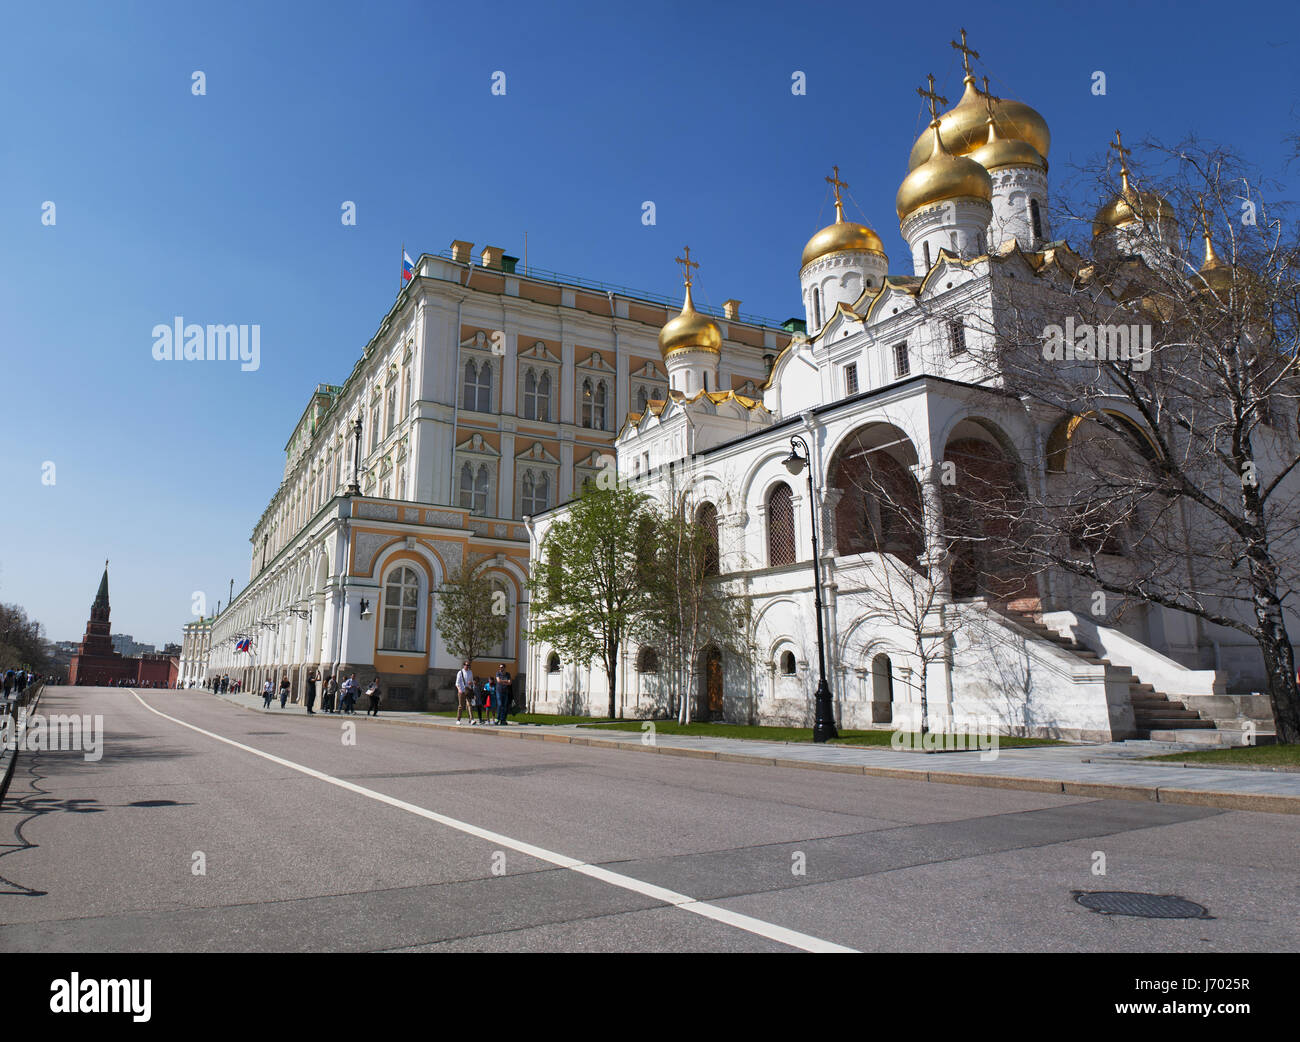 Russia, Moscow Kremlin: the Grand Kremlin Palace, headquarter of Russian government institutions, and the Cathedral of the Annunciation Stock Photo